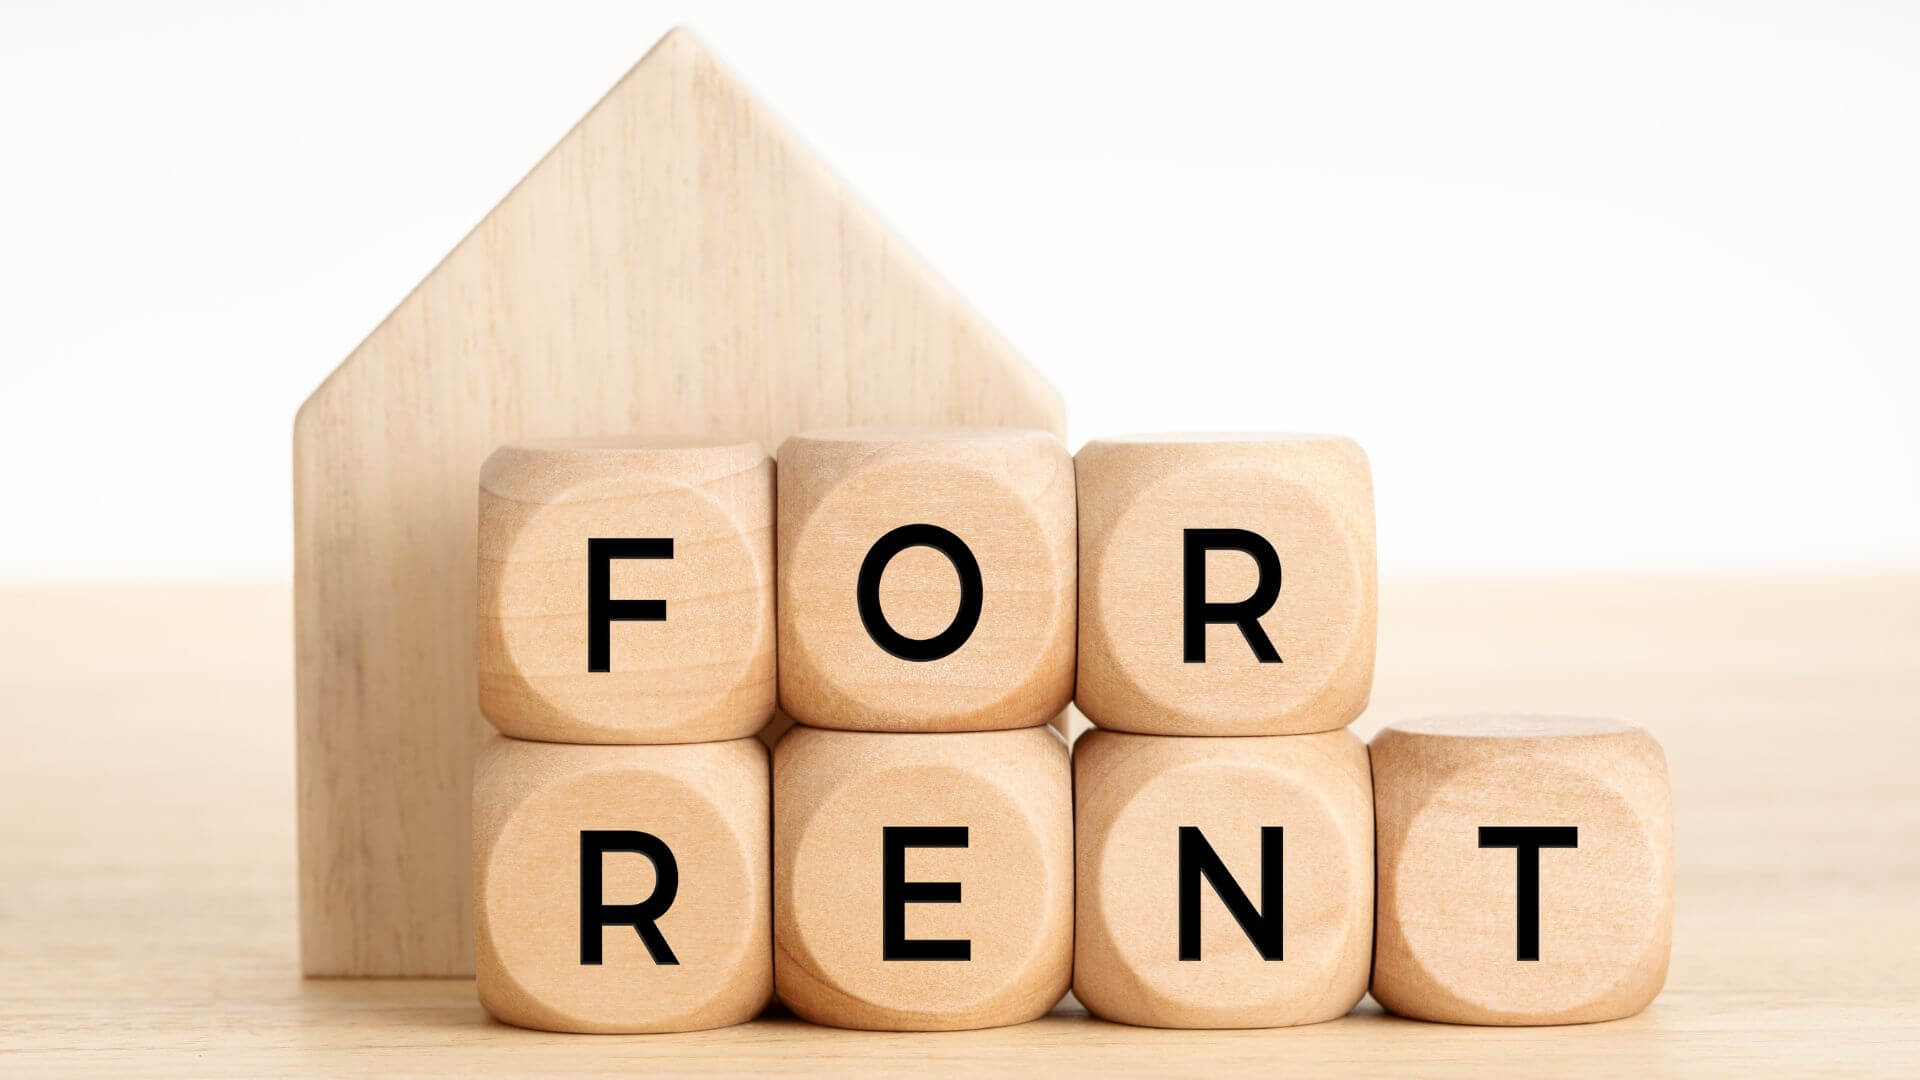 Wooden blocks spelling out 'FOR RENT' in front of a minimalist wooden house silhouette, symbolizing the considerations for setting rental prices in real estate. Key topics include market analysis, property features, local amenities, and finding the balance for competitive pricing.